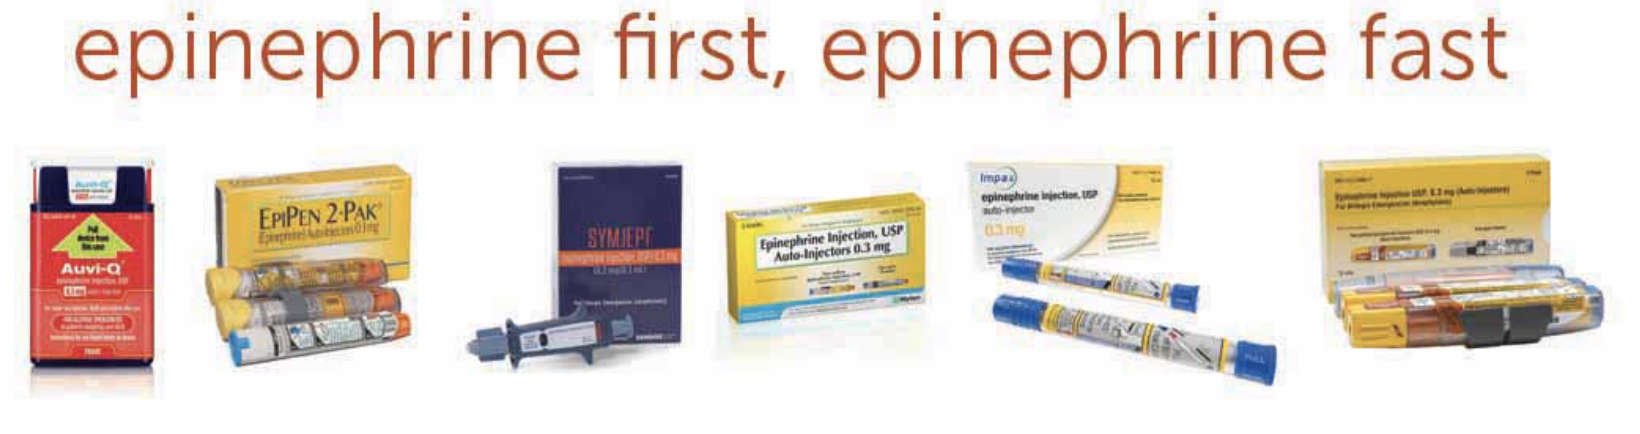 photo showing an example of all epinephrine injectors